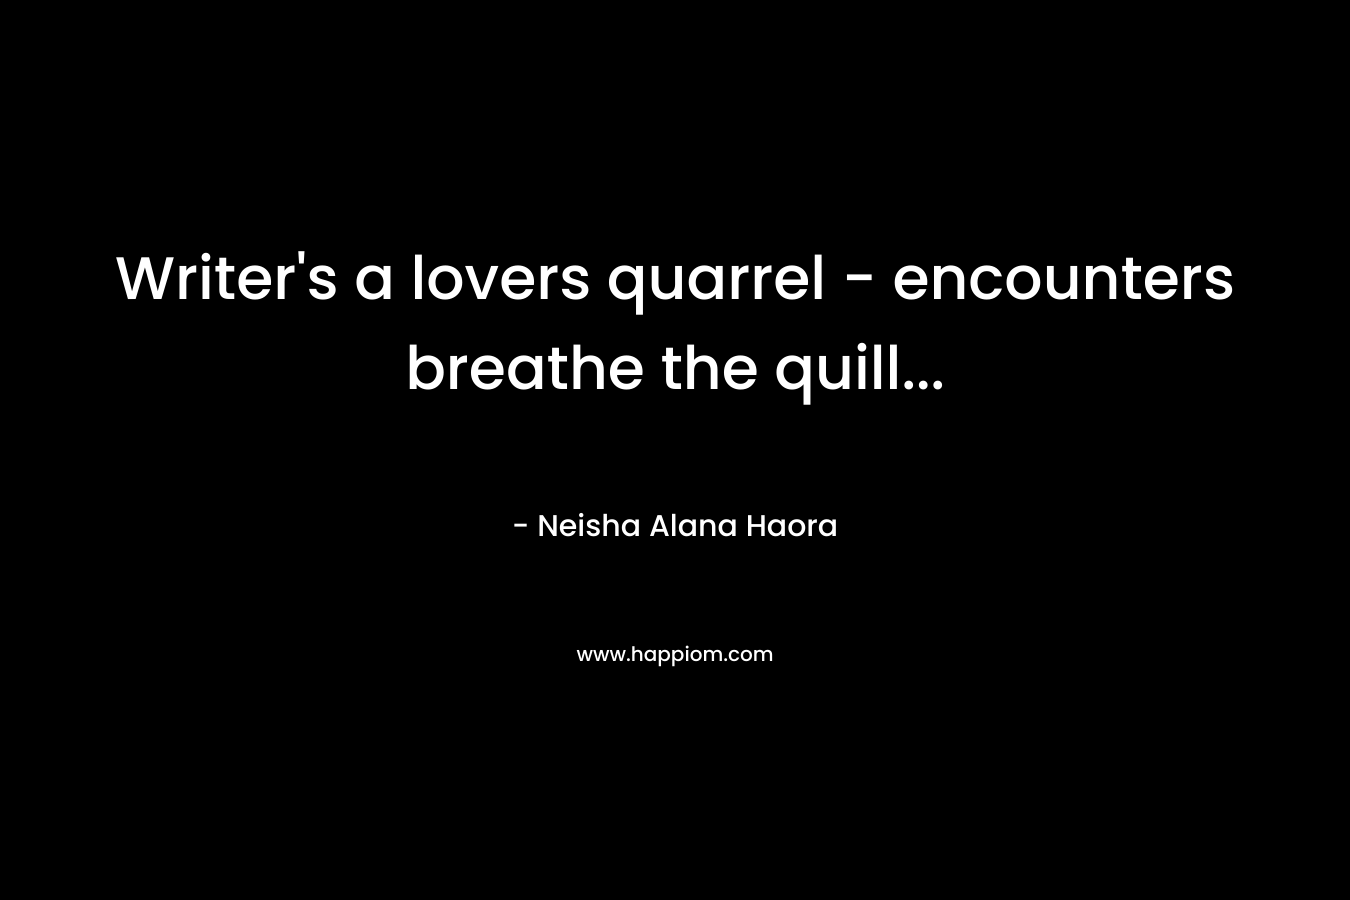 Writer's a lovers quarrel - encounters breathe the quill...